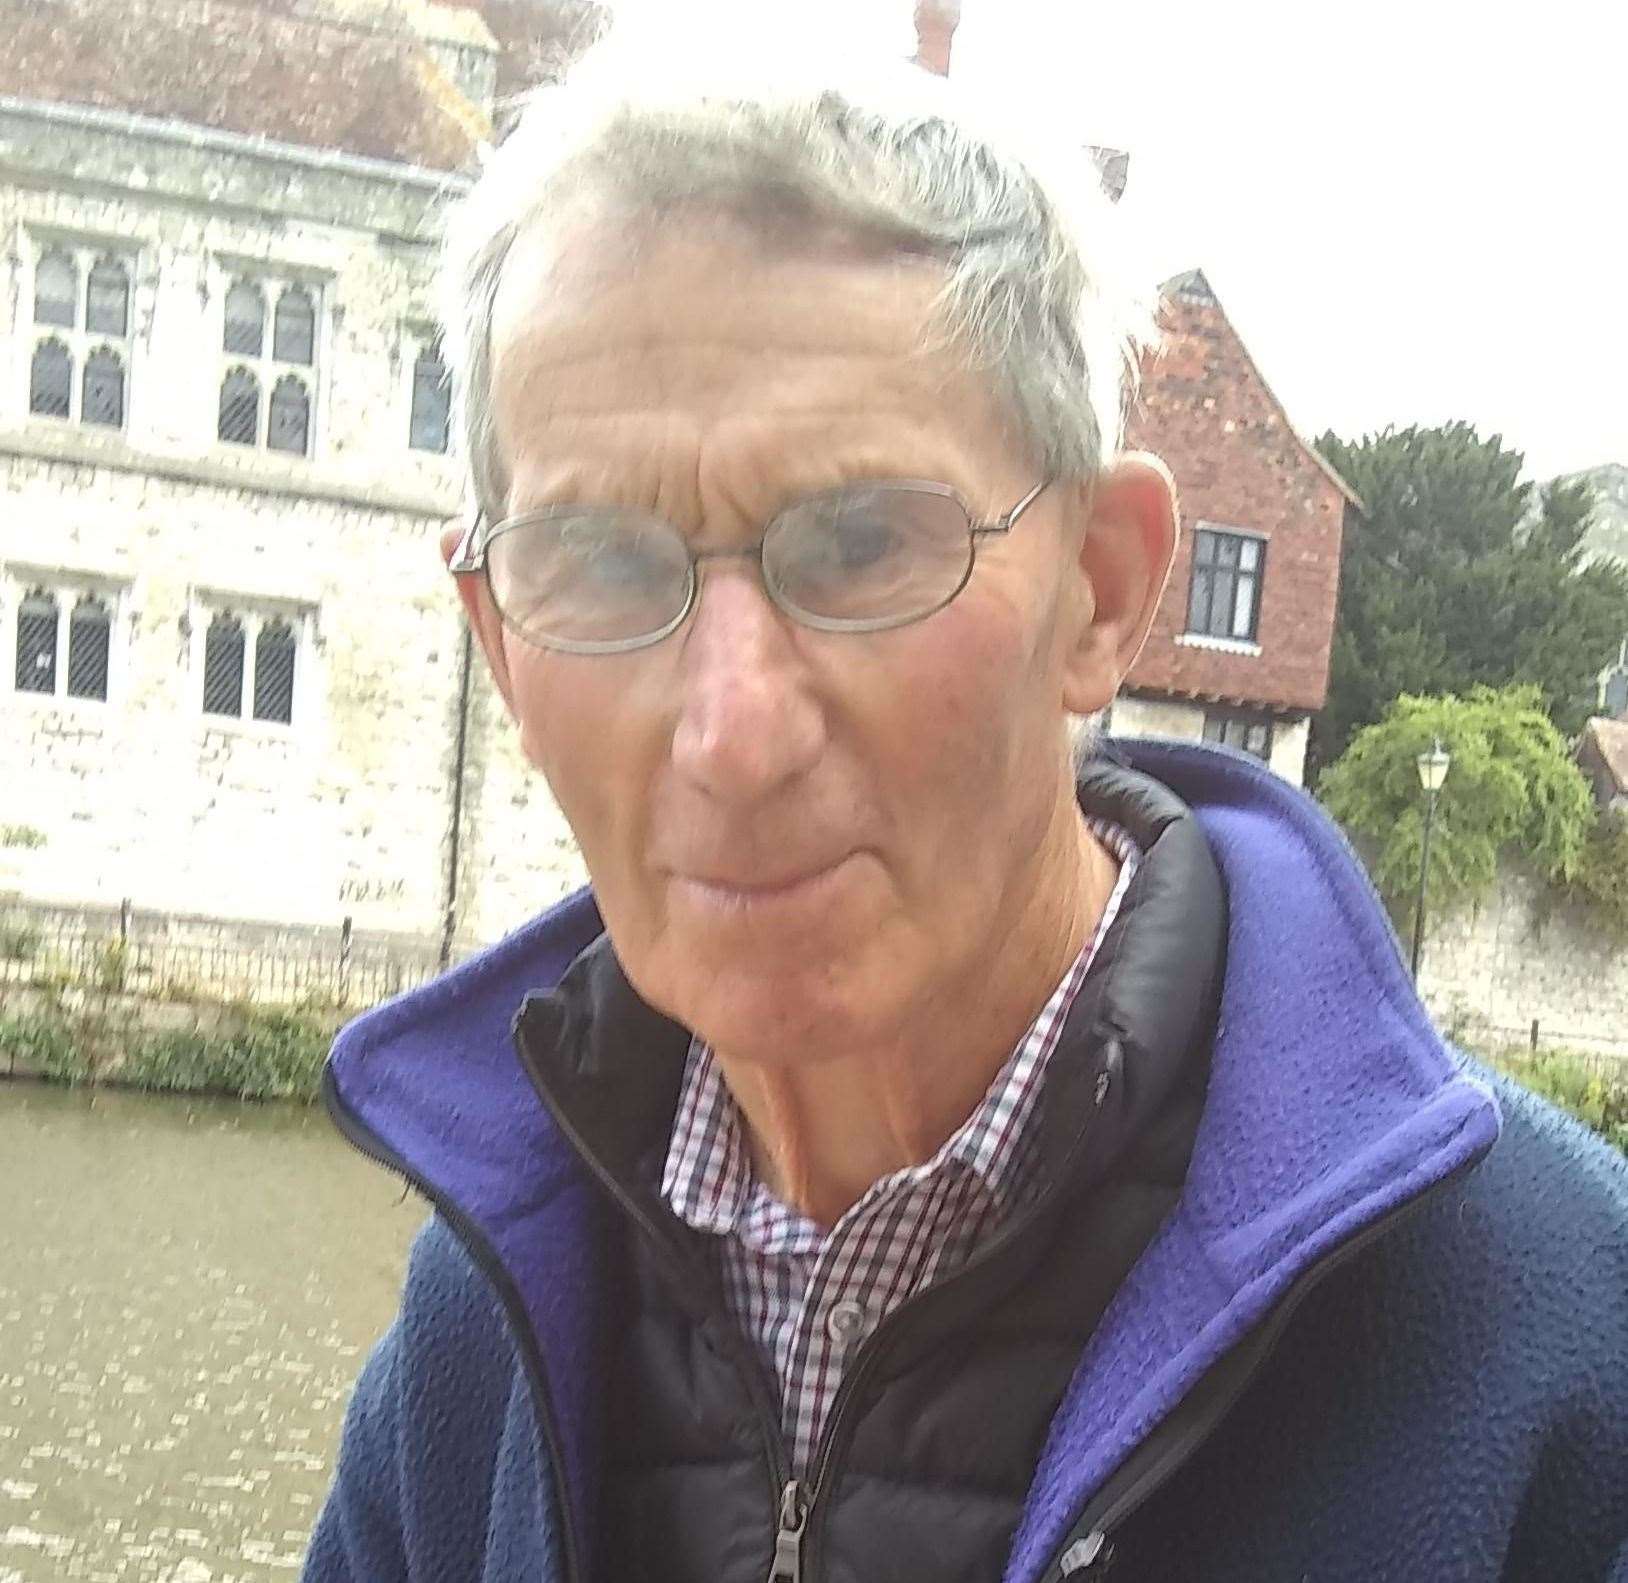 Edward Cheesman, 82, has been missing from Maidstone since November 17